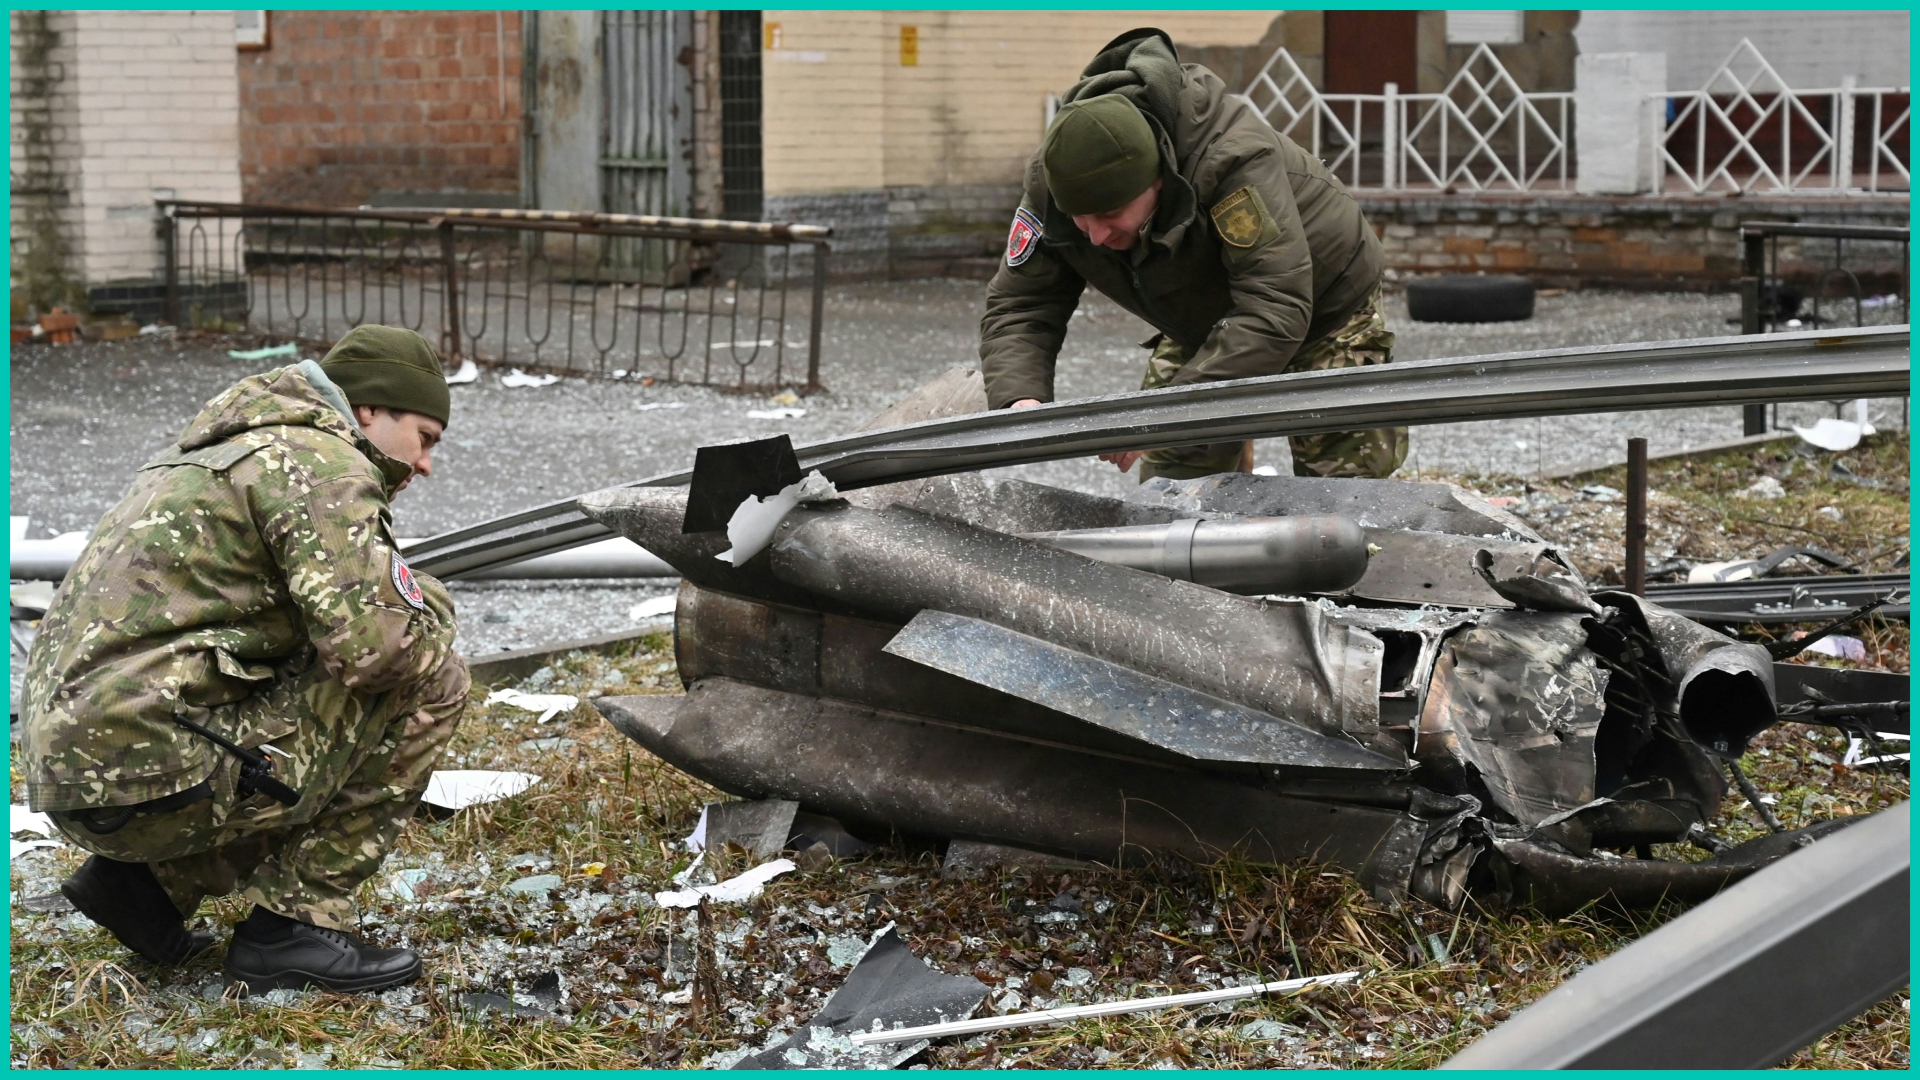 Police and security personnel inspect the remains of a shell in a street in Kyiv